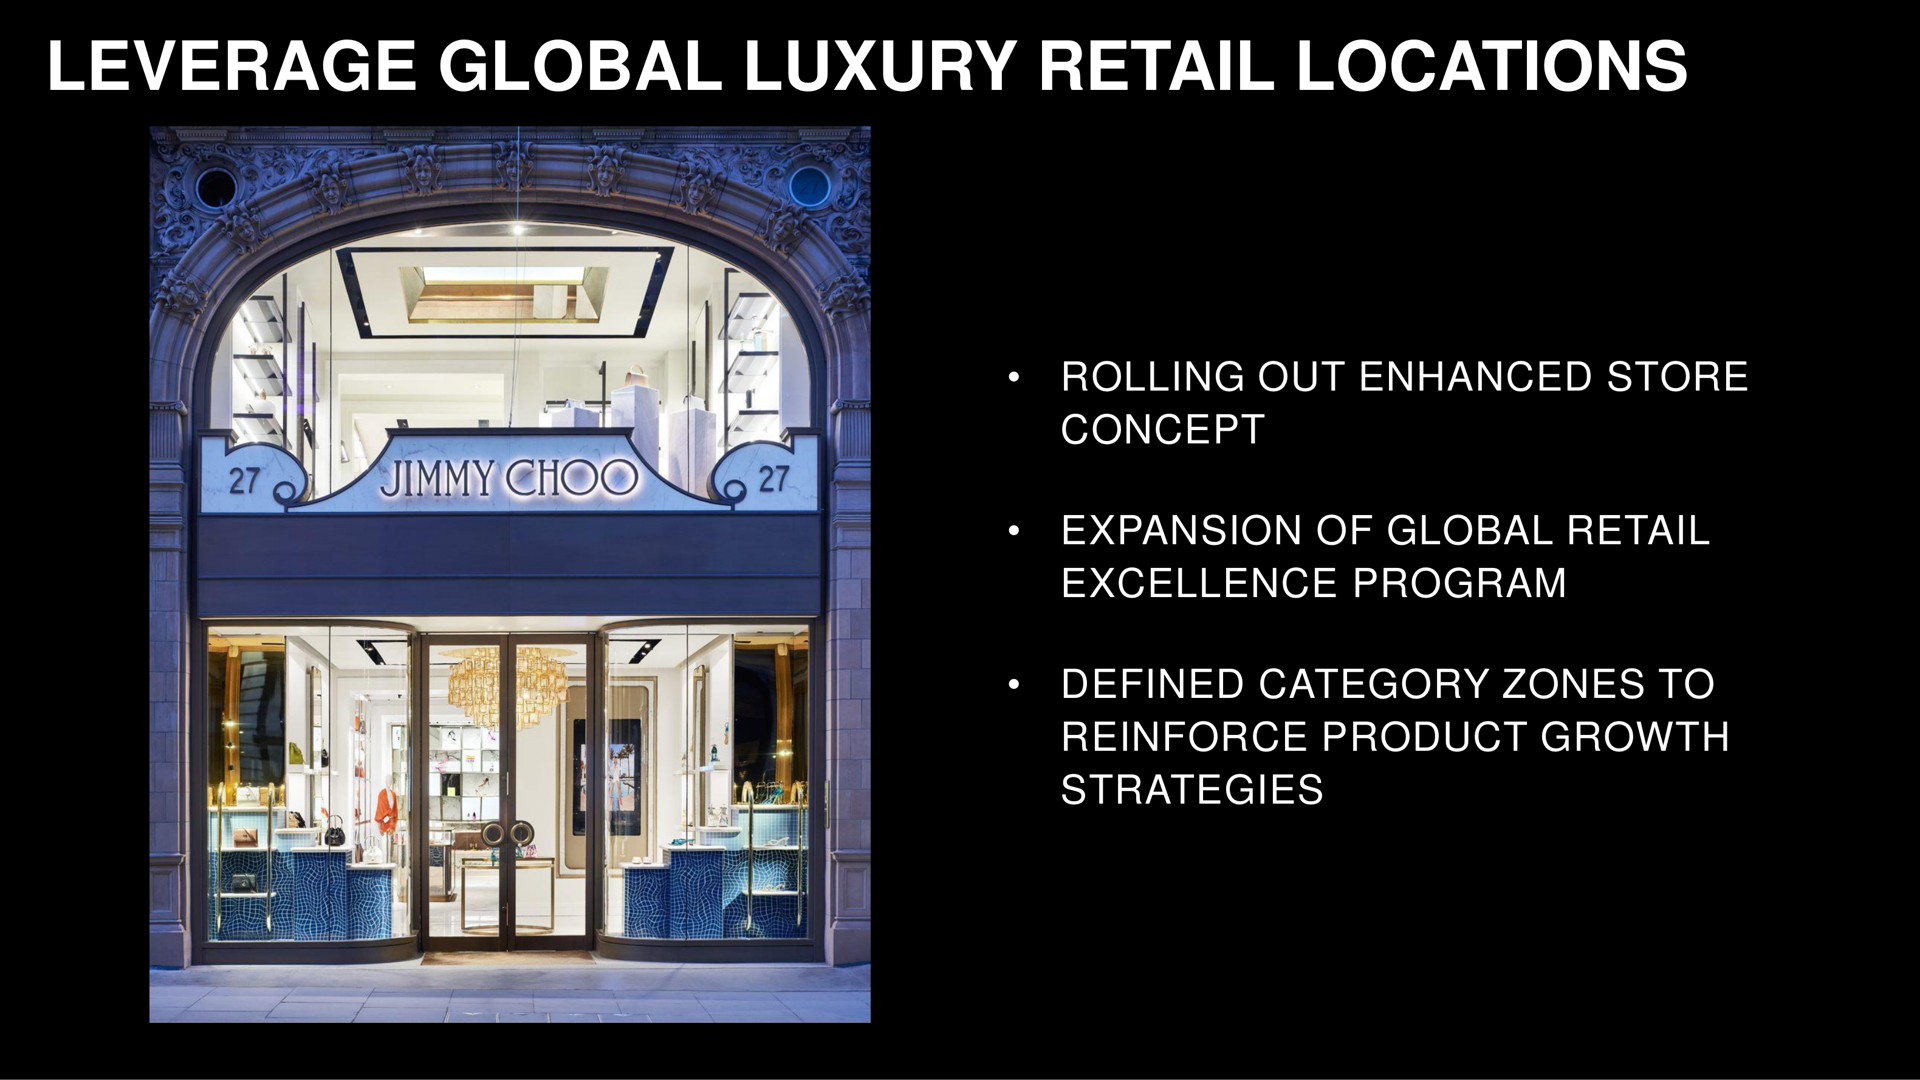 leverage global luxury retail locations rolling out enhanced store concept expansion of excellence program defined category zones to reinforce product growth strategies | Capri Holdings